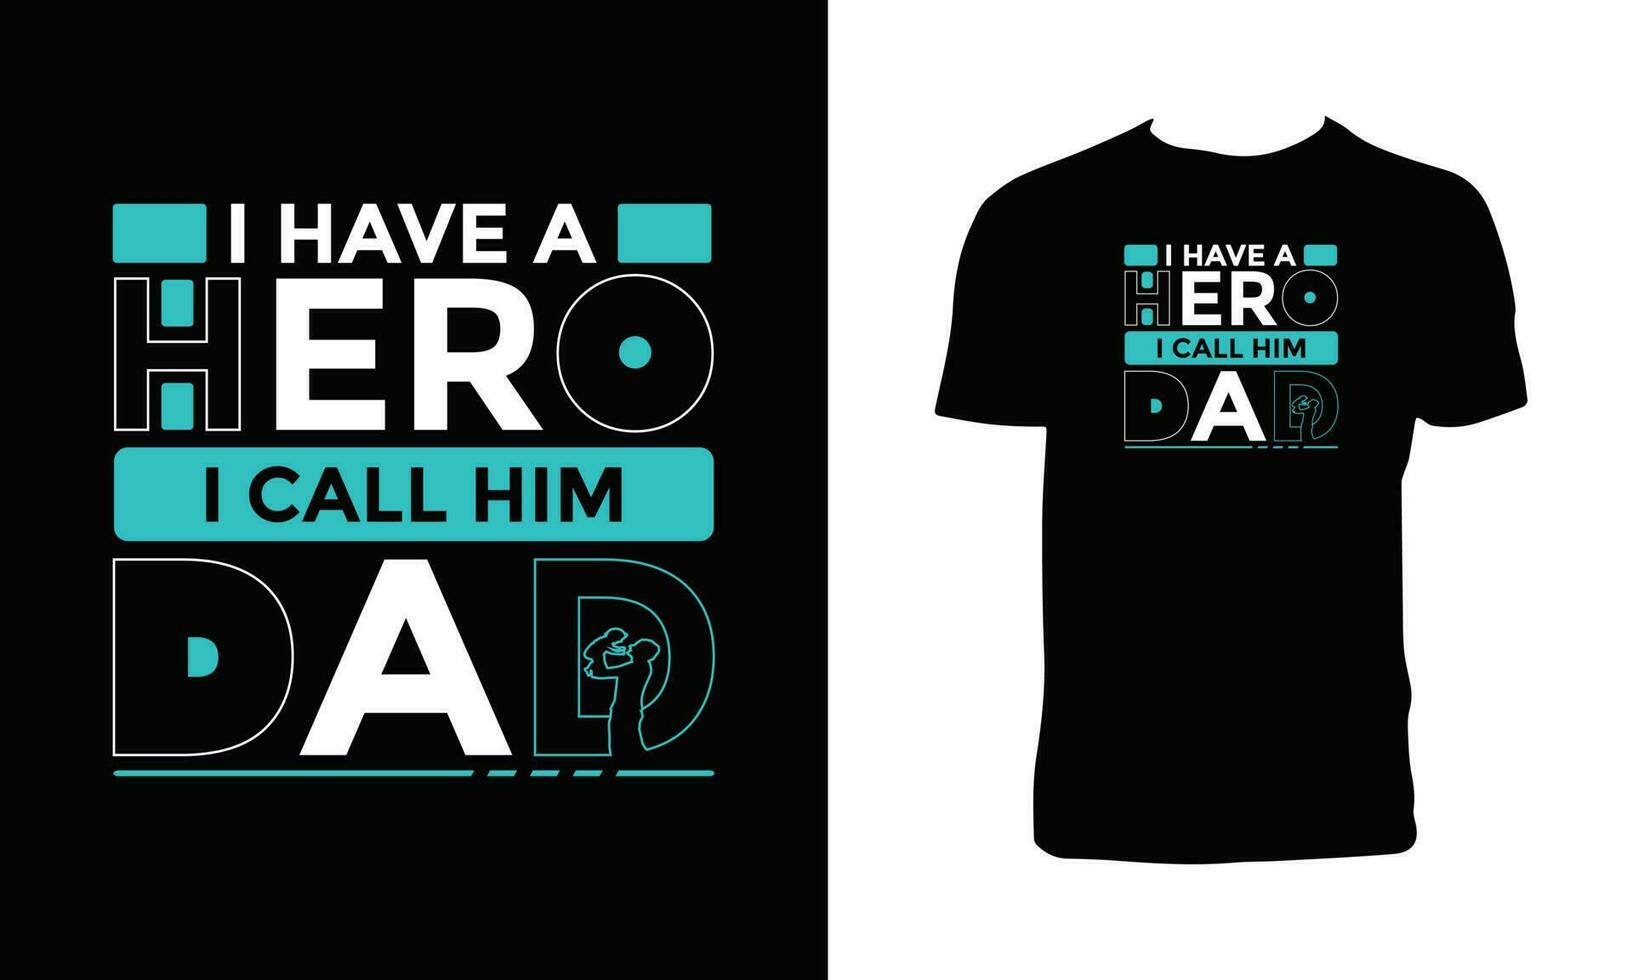 Father's Day T Shirt Design. vector